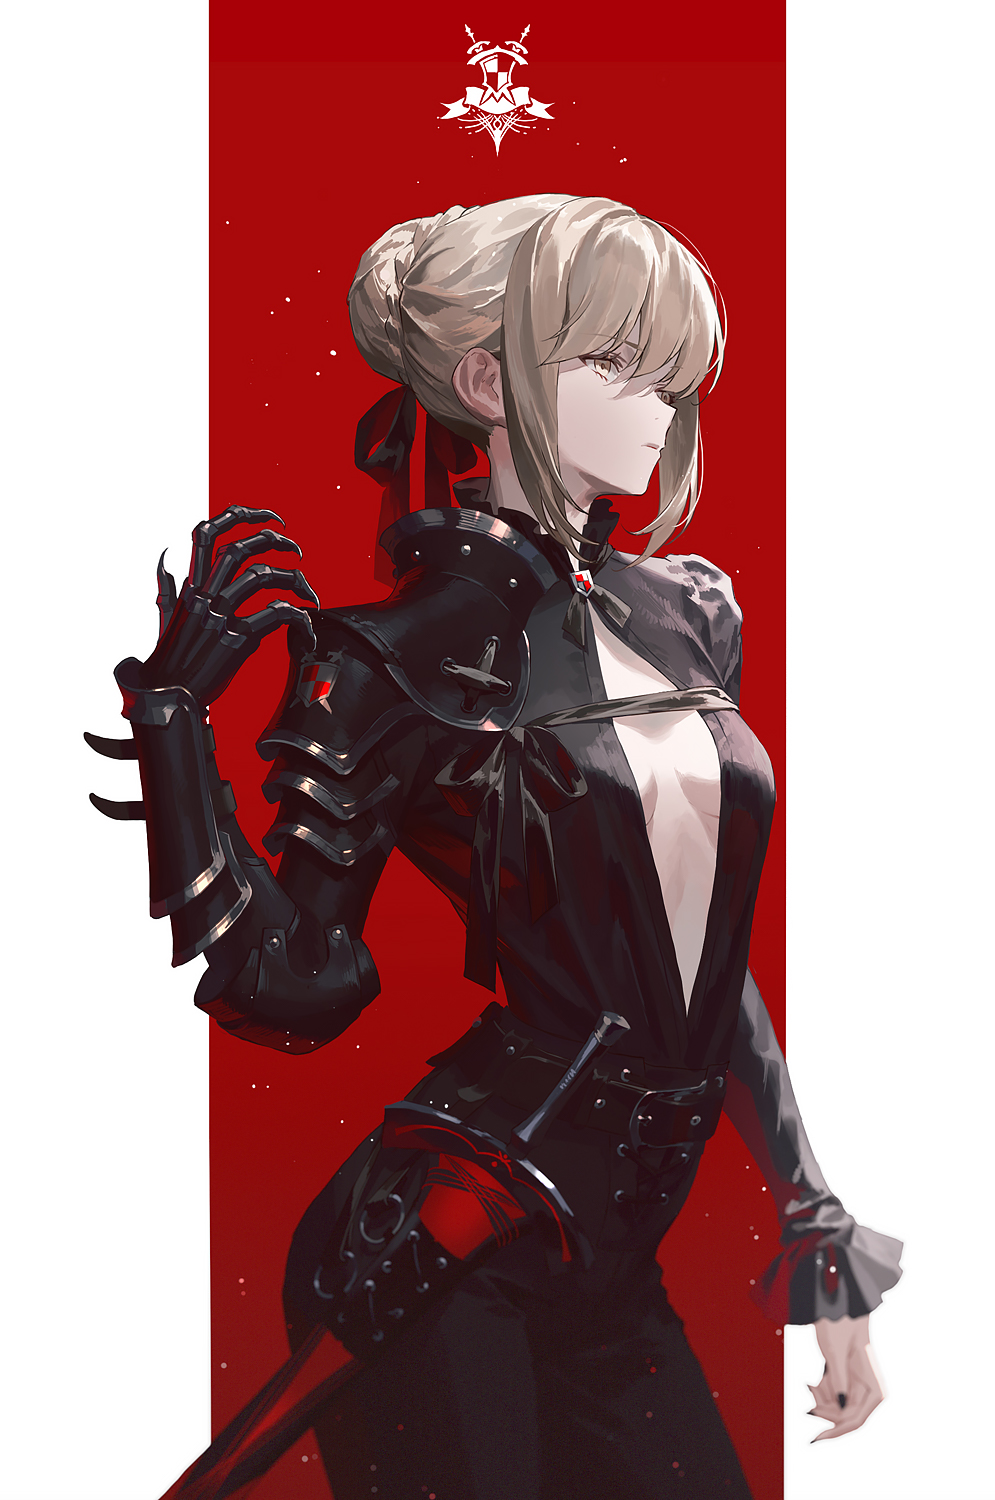 Anime 995x1500 fate/stay night: heaven's feel Fate series Fate/Stay Night hairbun french braids no bra cleavage belly thighs armored woman bangs underboob anime girls Artoria Pendragon Saber Alter Fate/Grand Order ecchi 2D portrait display anime blonde yellow eyes sheath parted lips fan art artwork Fajyobore